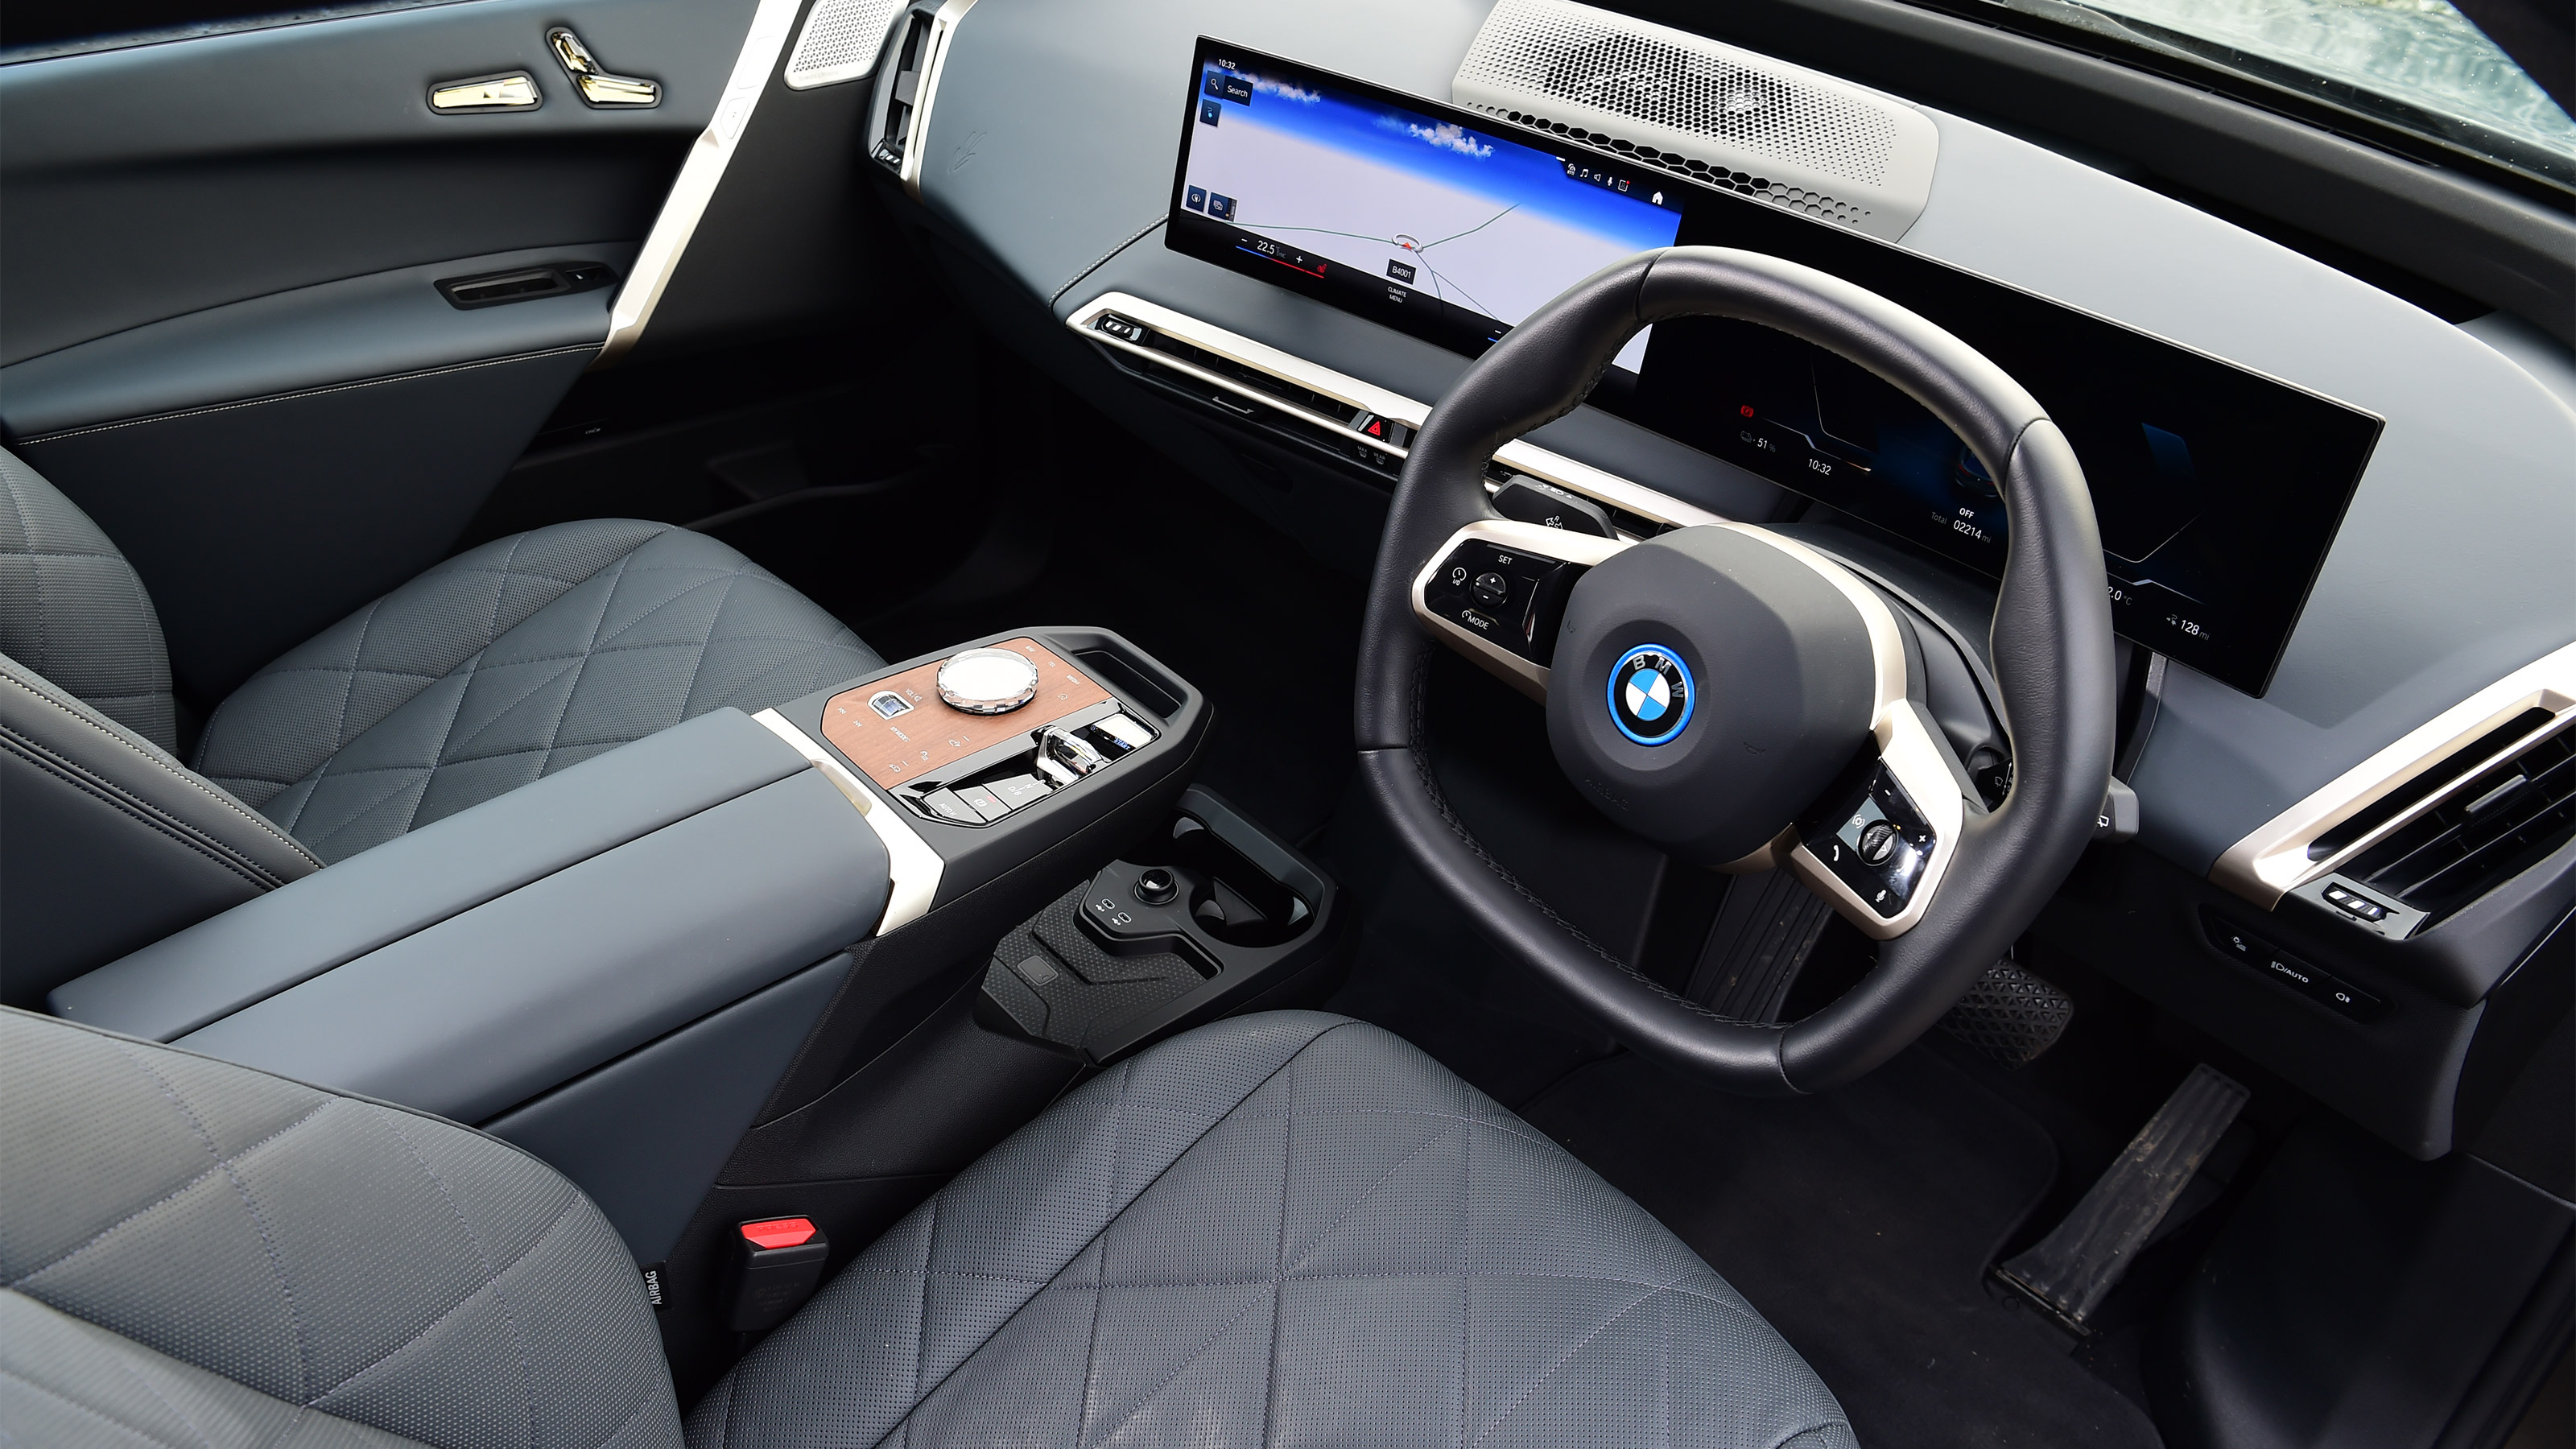 The BMW iX: The Pinnacle of Electric Innovation